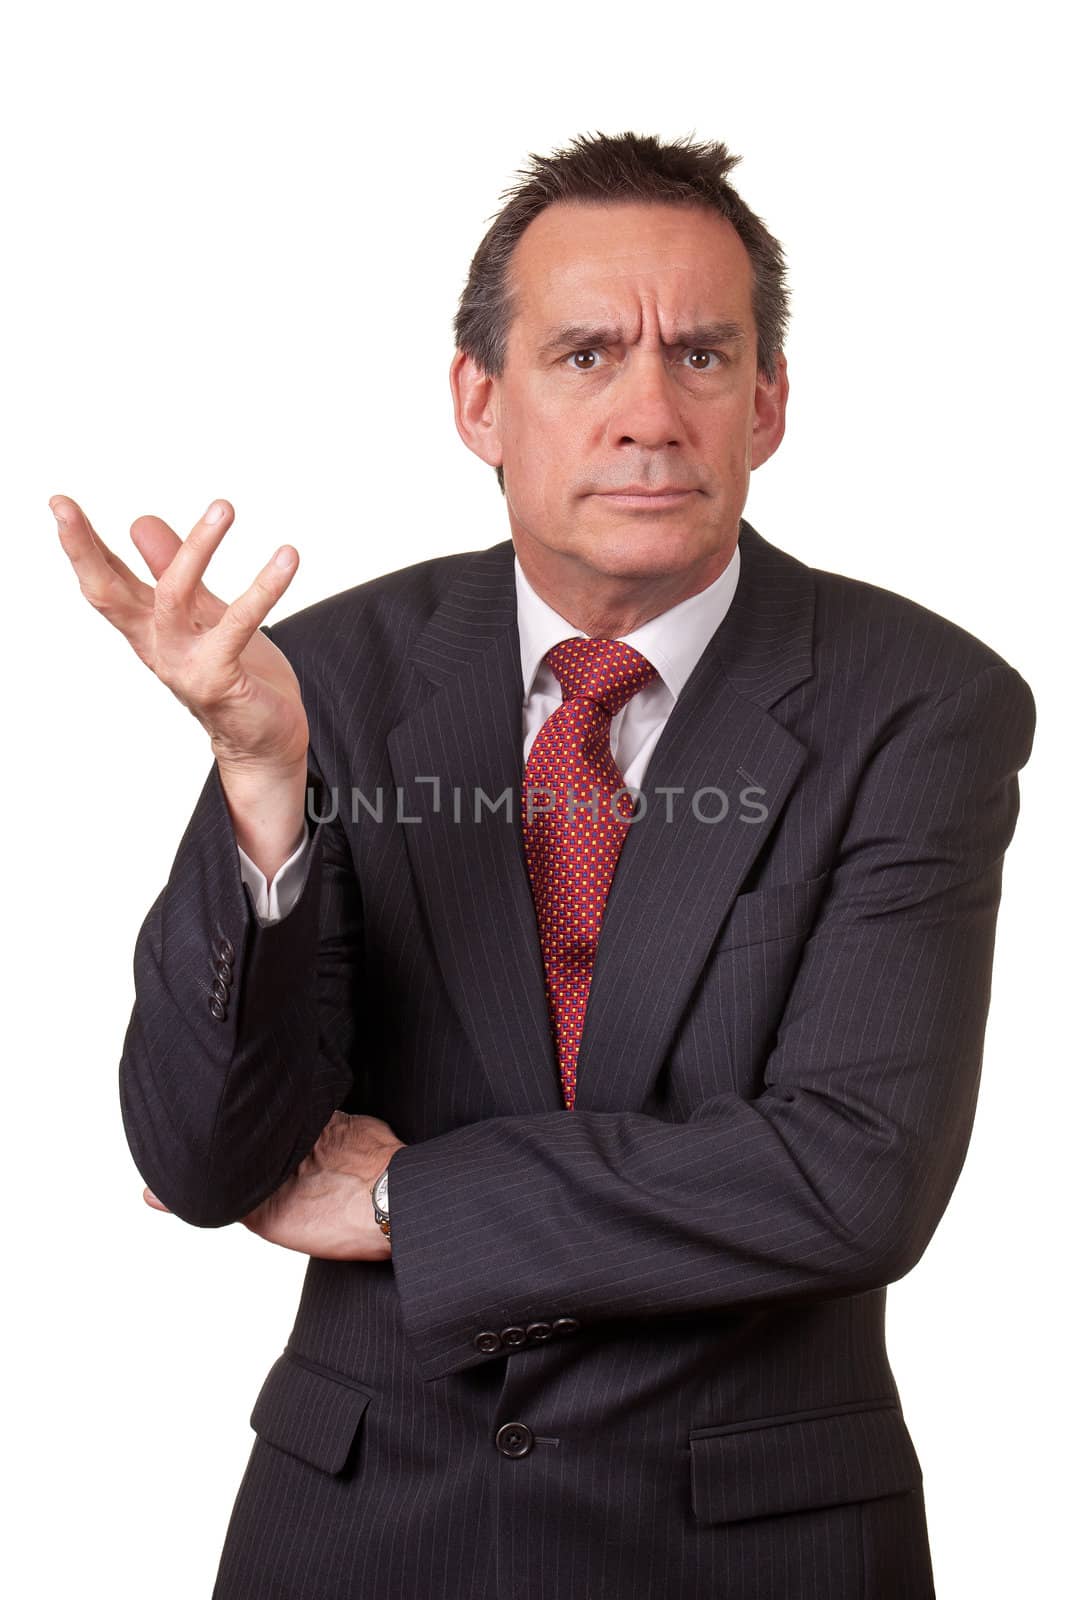 Angry Frowning Business Man in Suit Raising Hand by scheriton